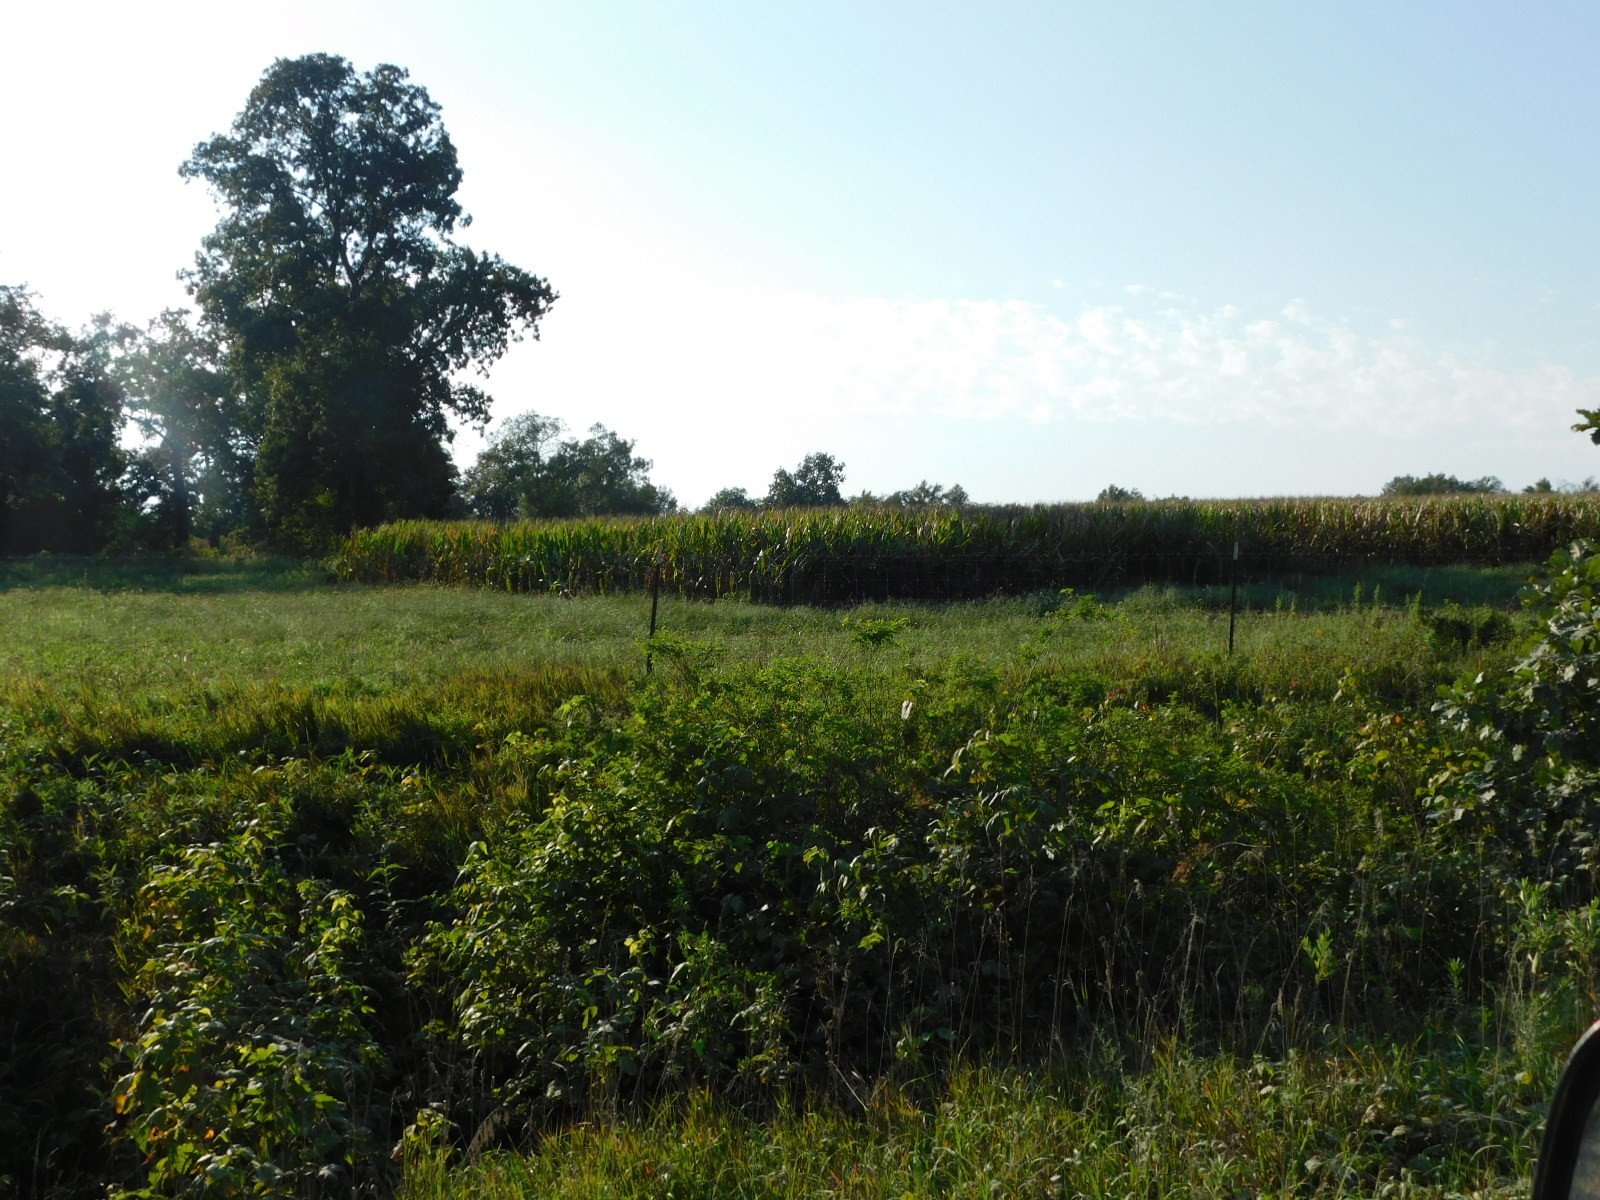 Crop Land - Southeast Corner - View to West